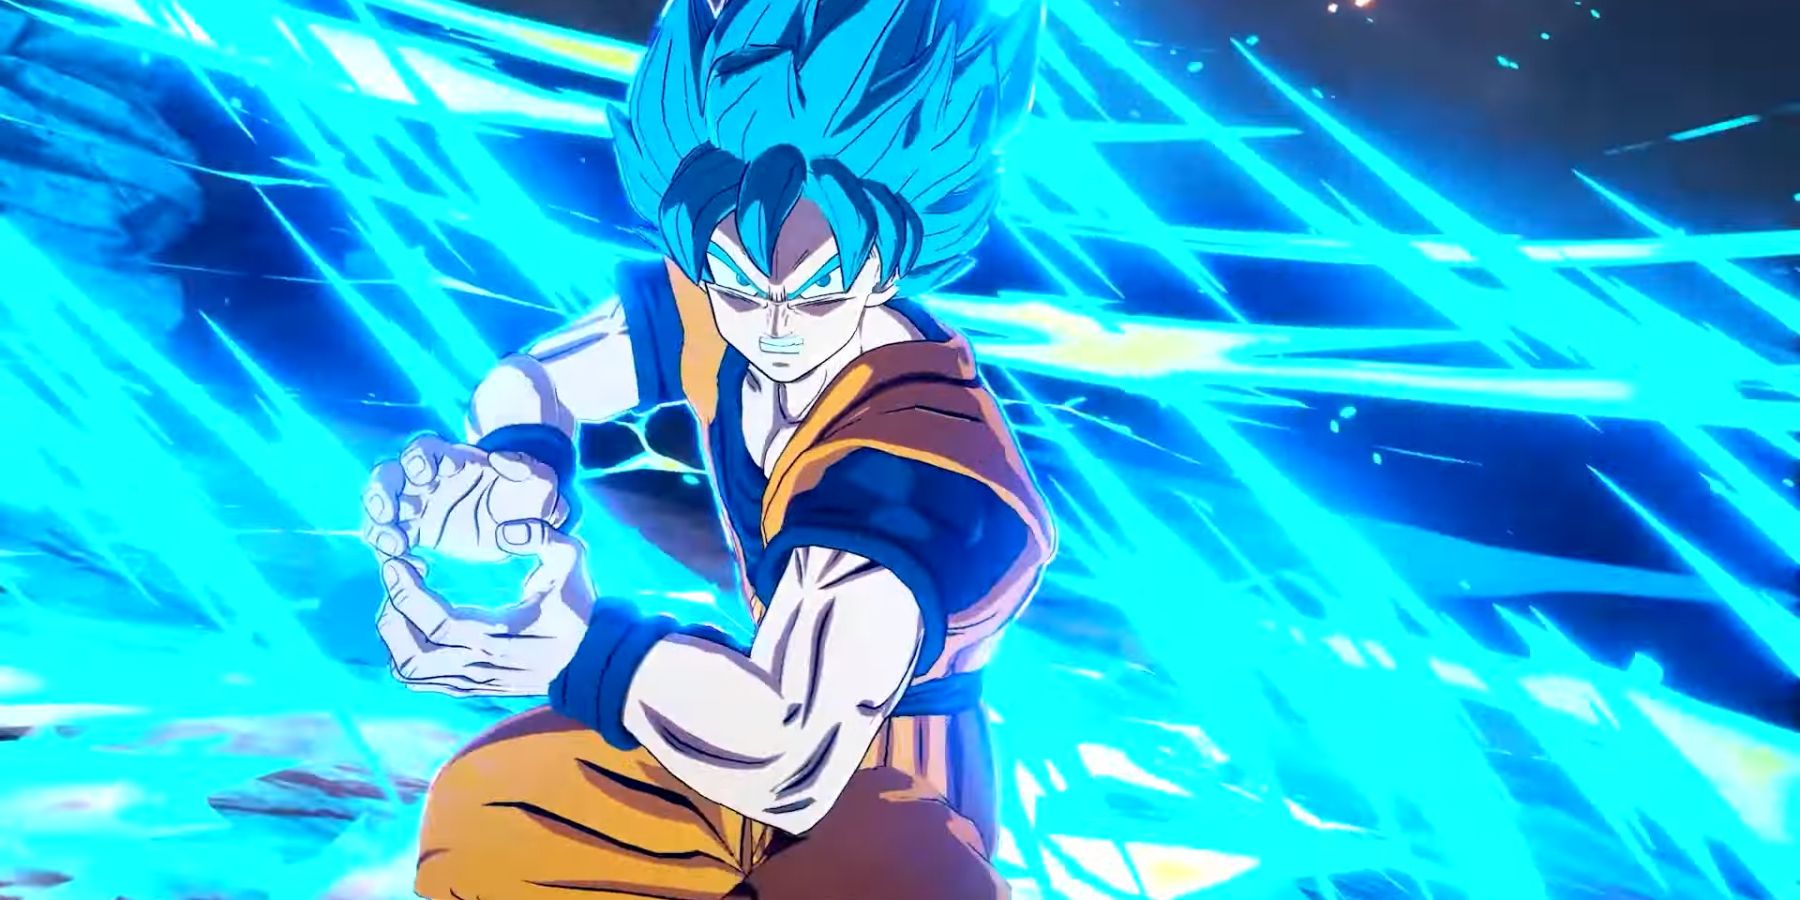 Goku from Dragon Ball surrounded by swirling blue energy as he charges an attack.